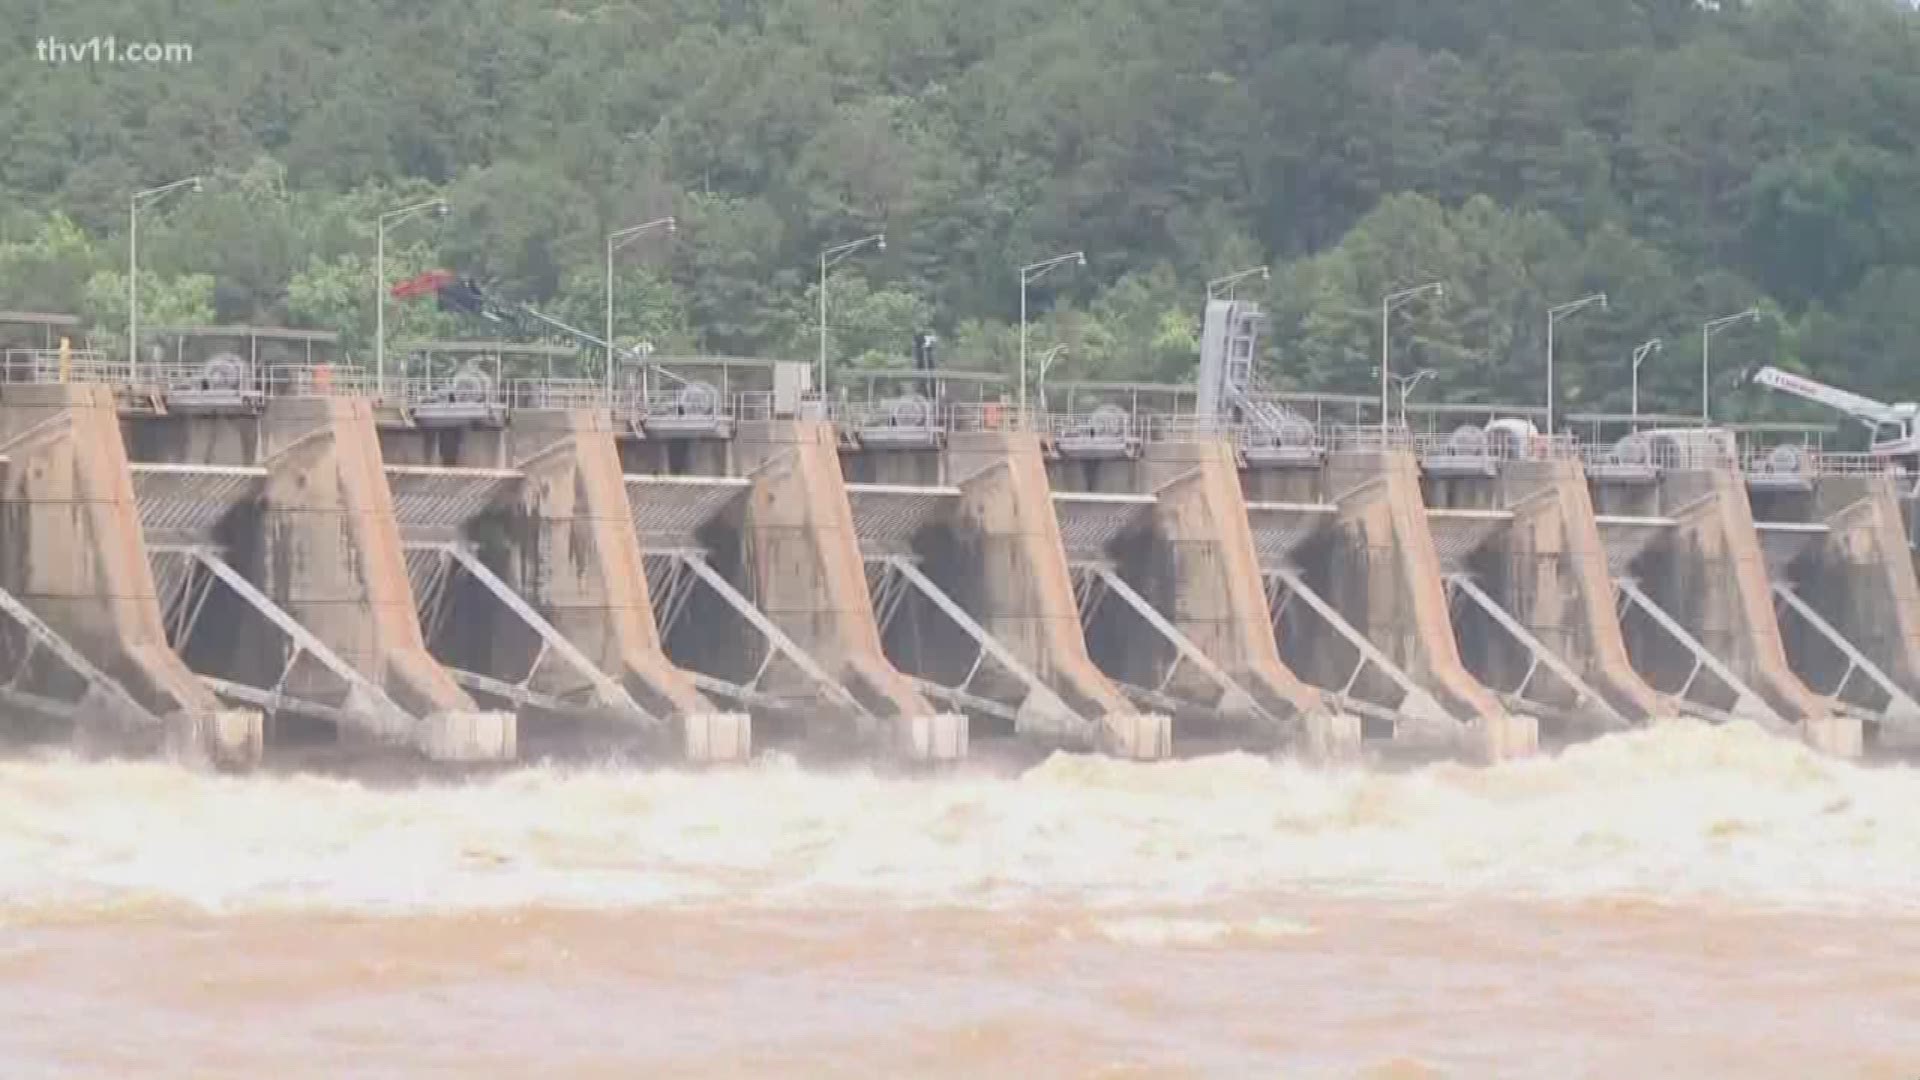 With the threat of such historic flooding, preparations are underway across the state.